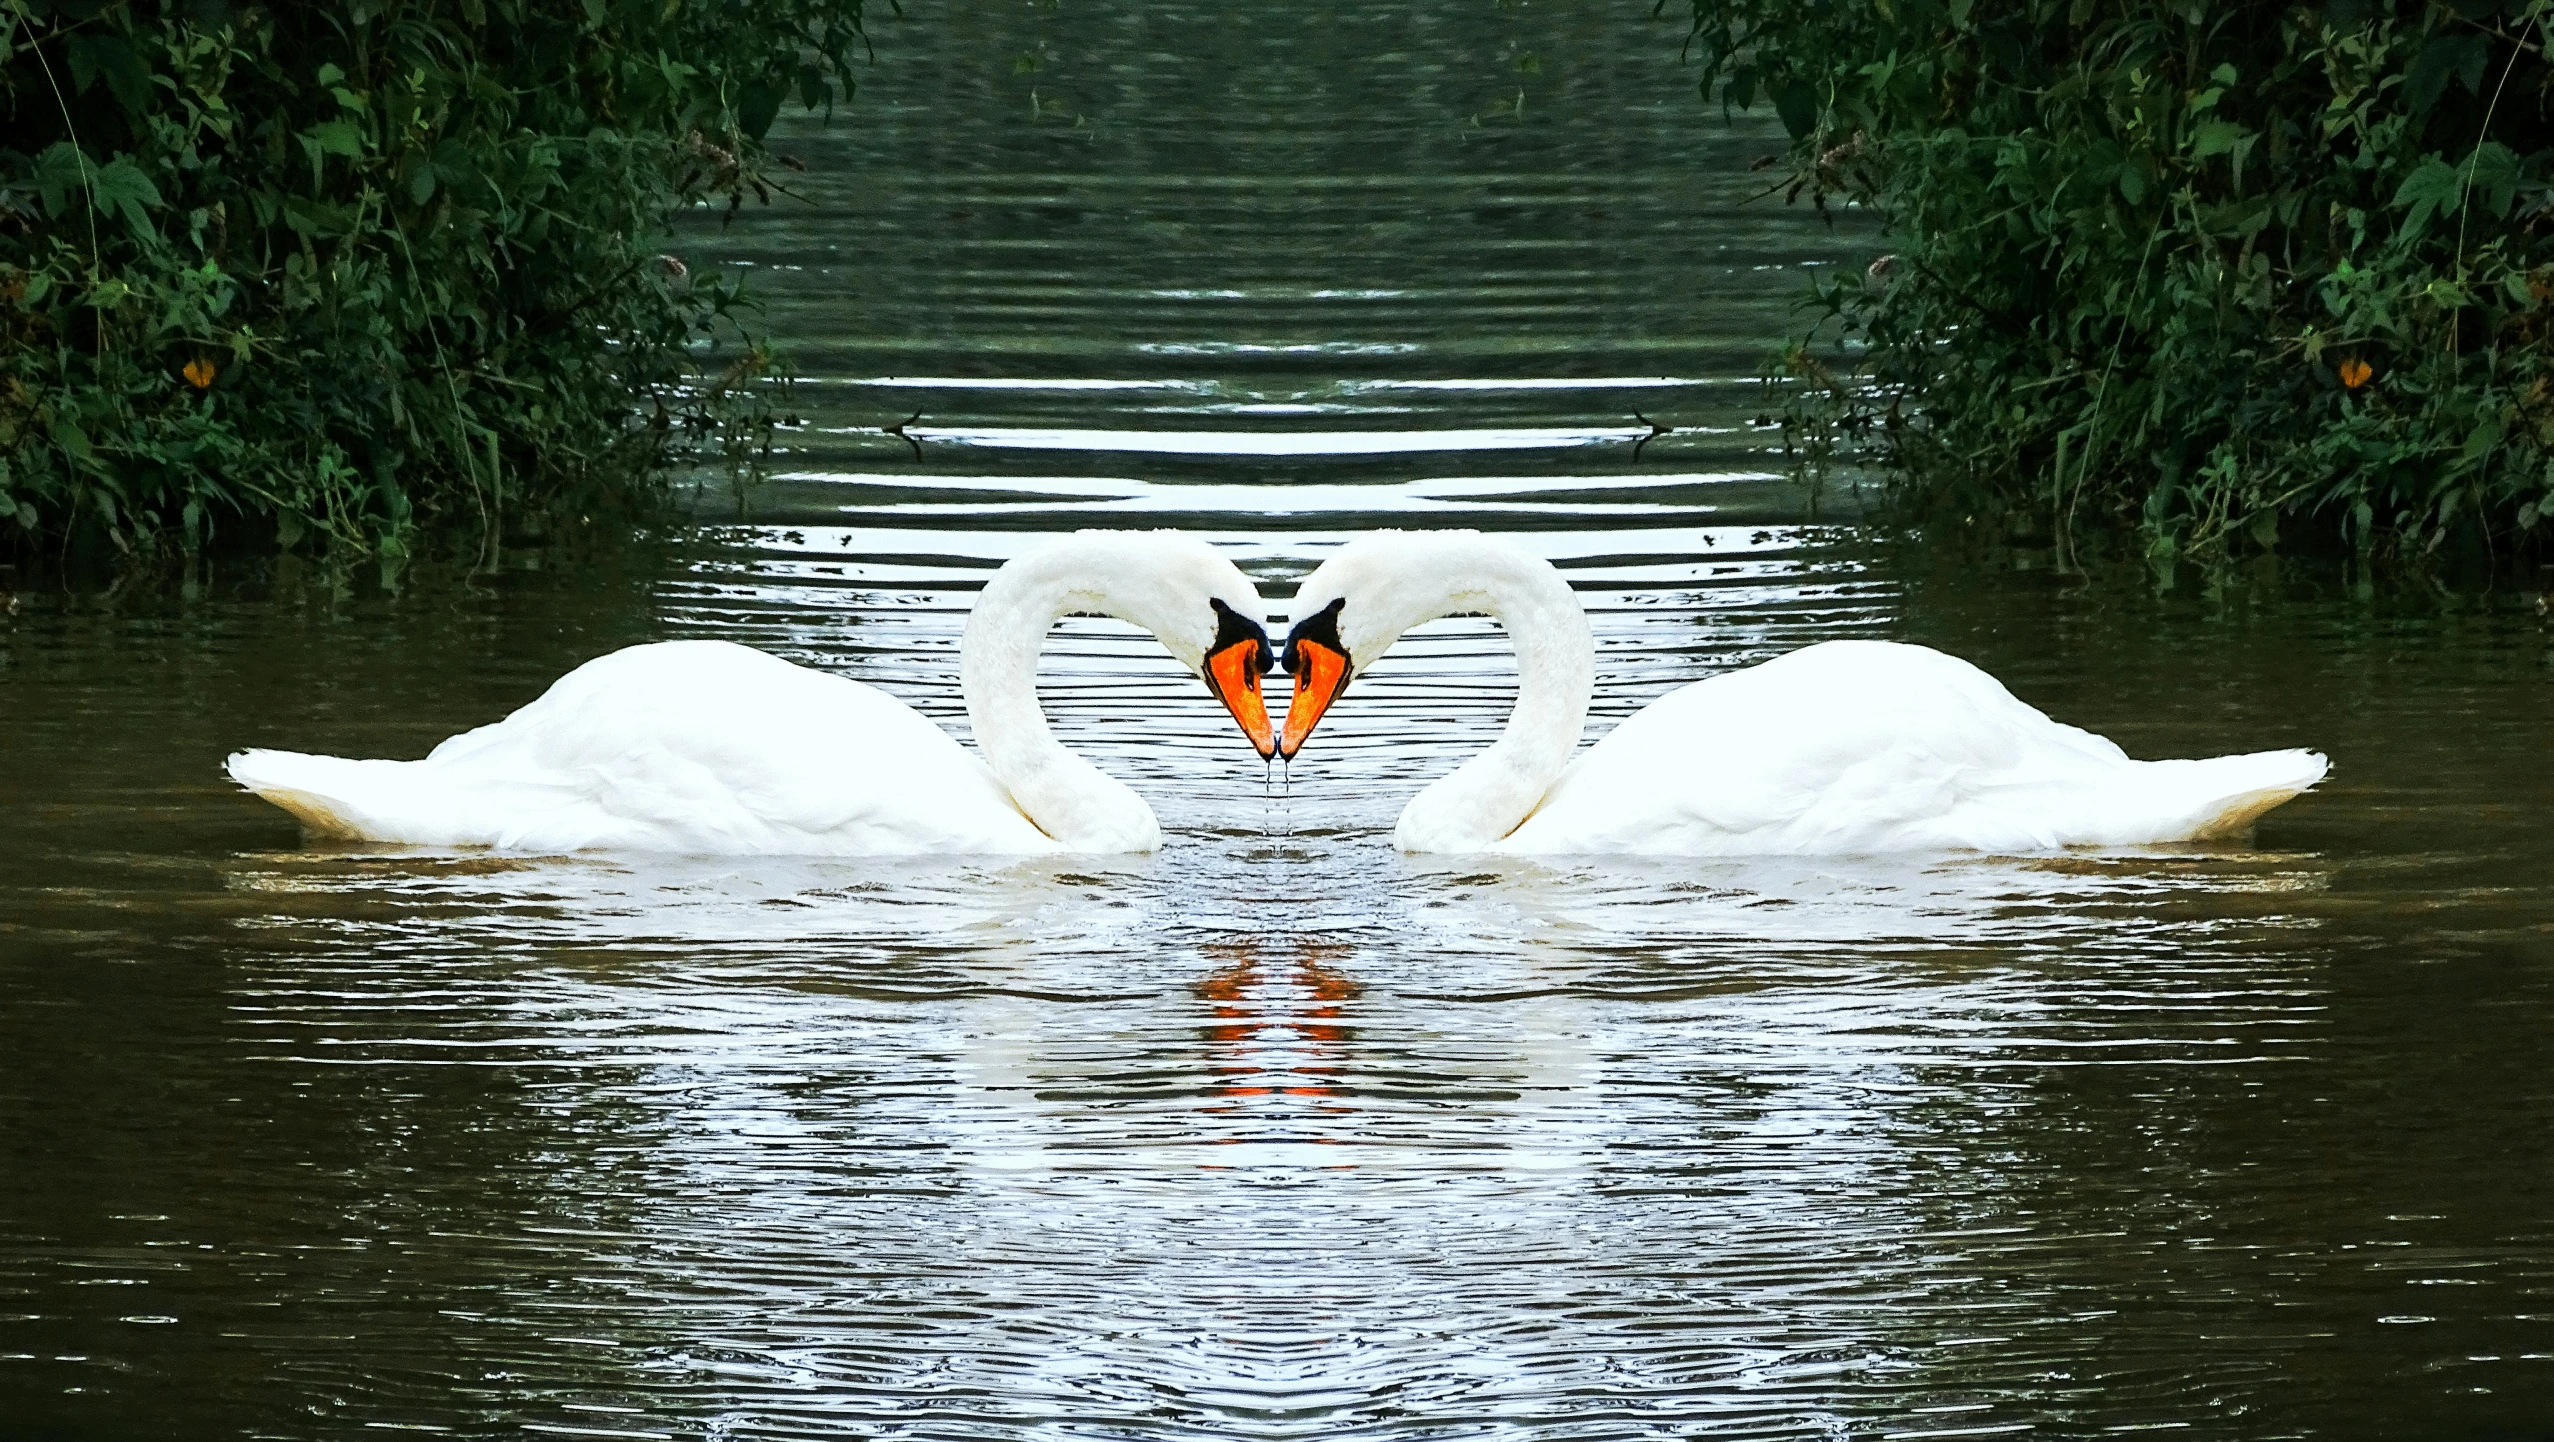 two swans are making their way through water